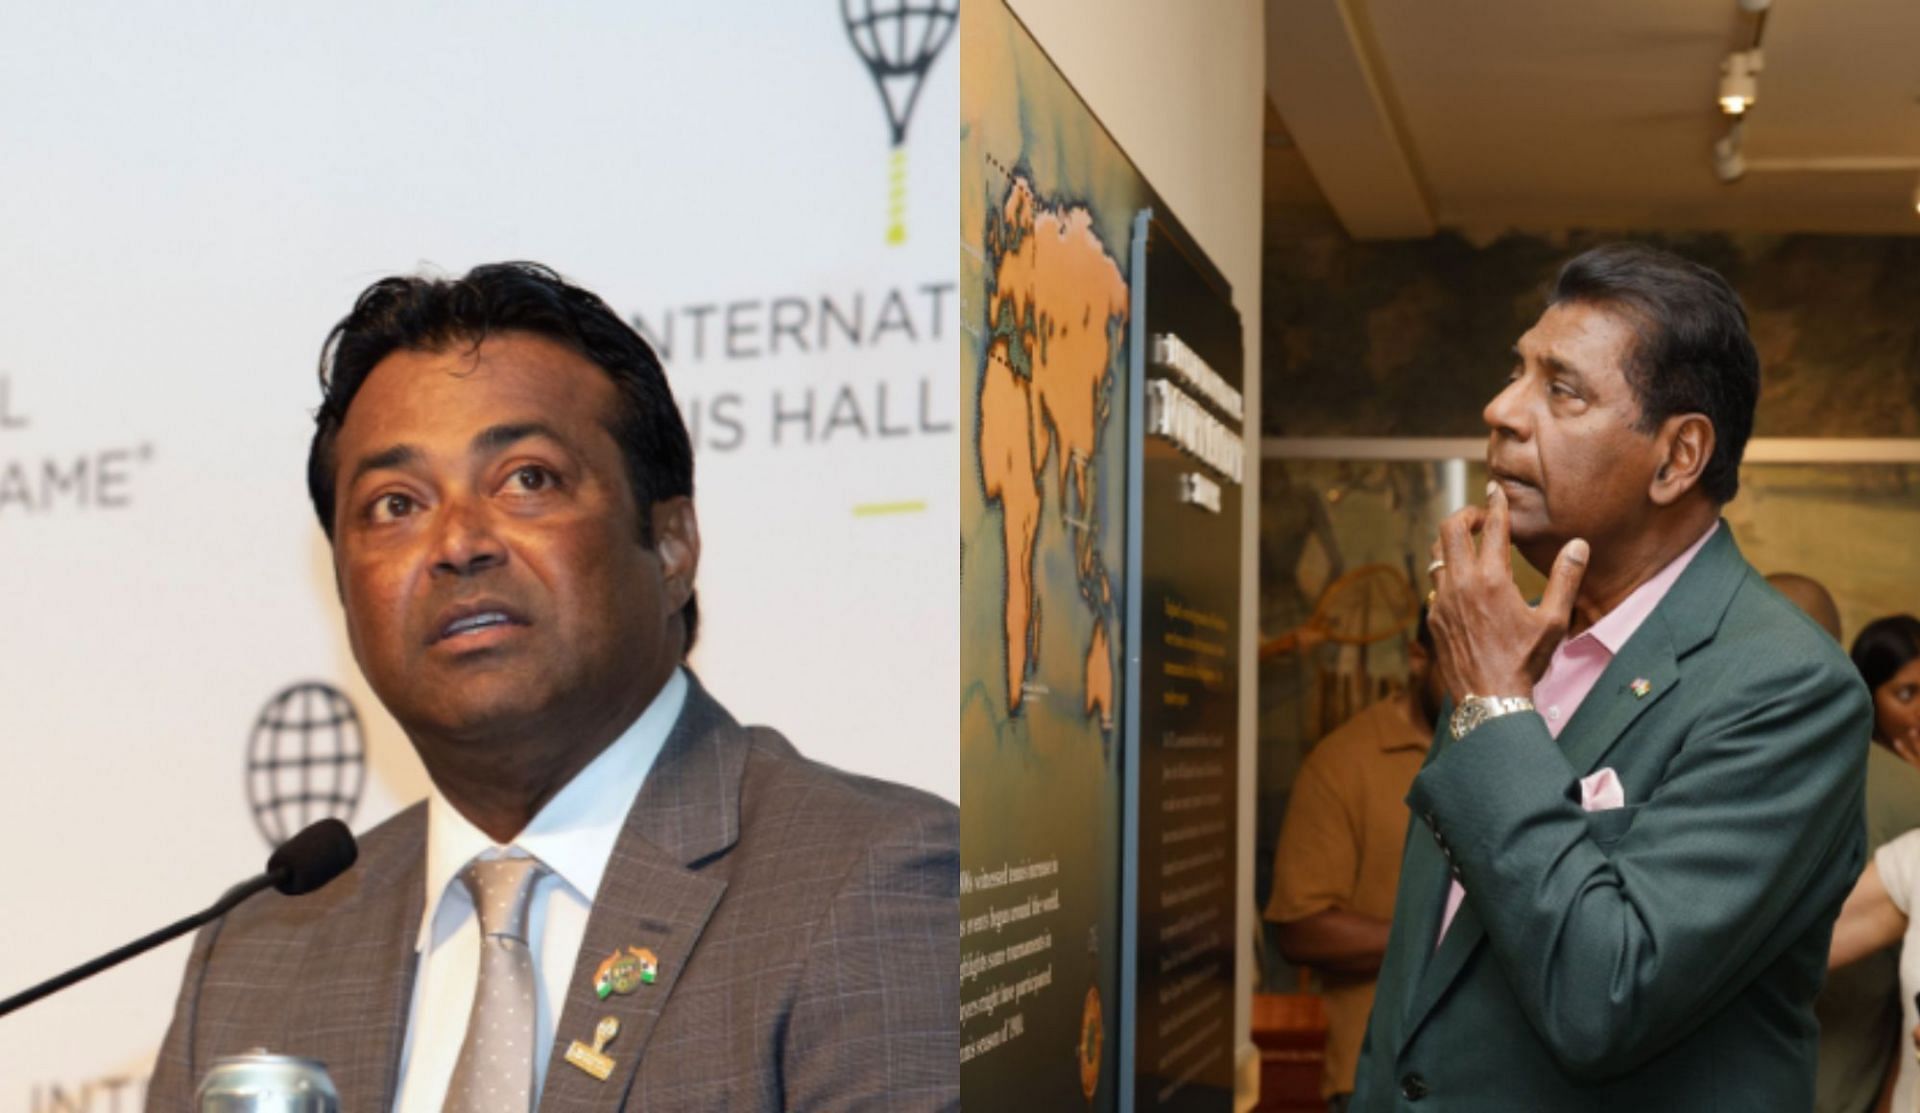 Indian tennis legends Leander Paes and Vijay Amritraj inducted into International Tennis Hall of Fame